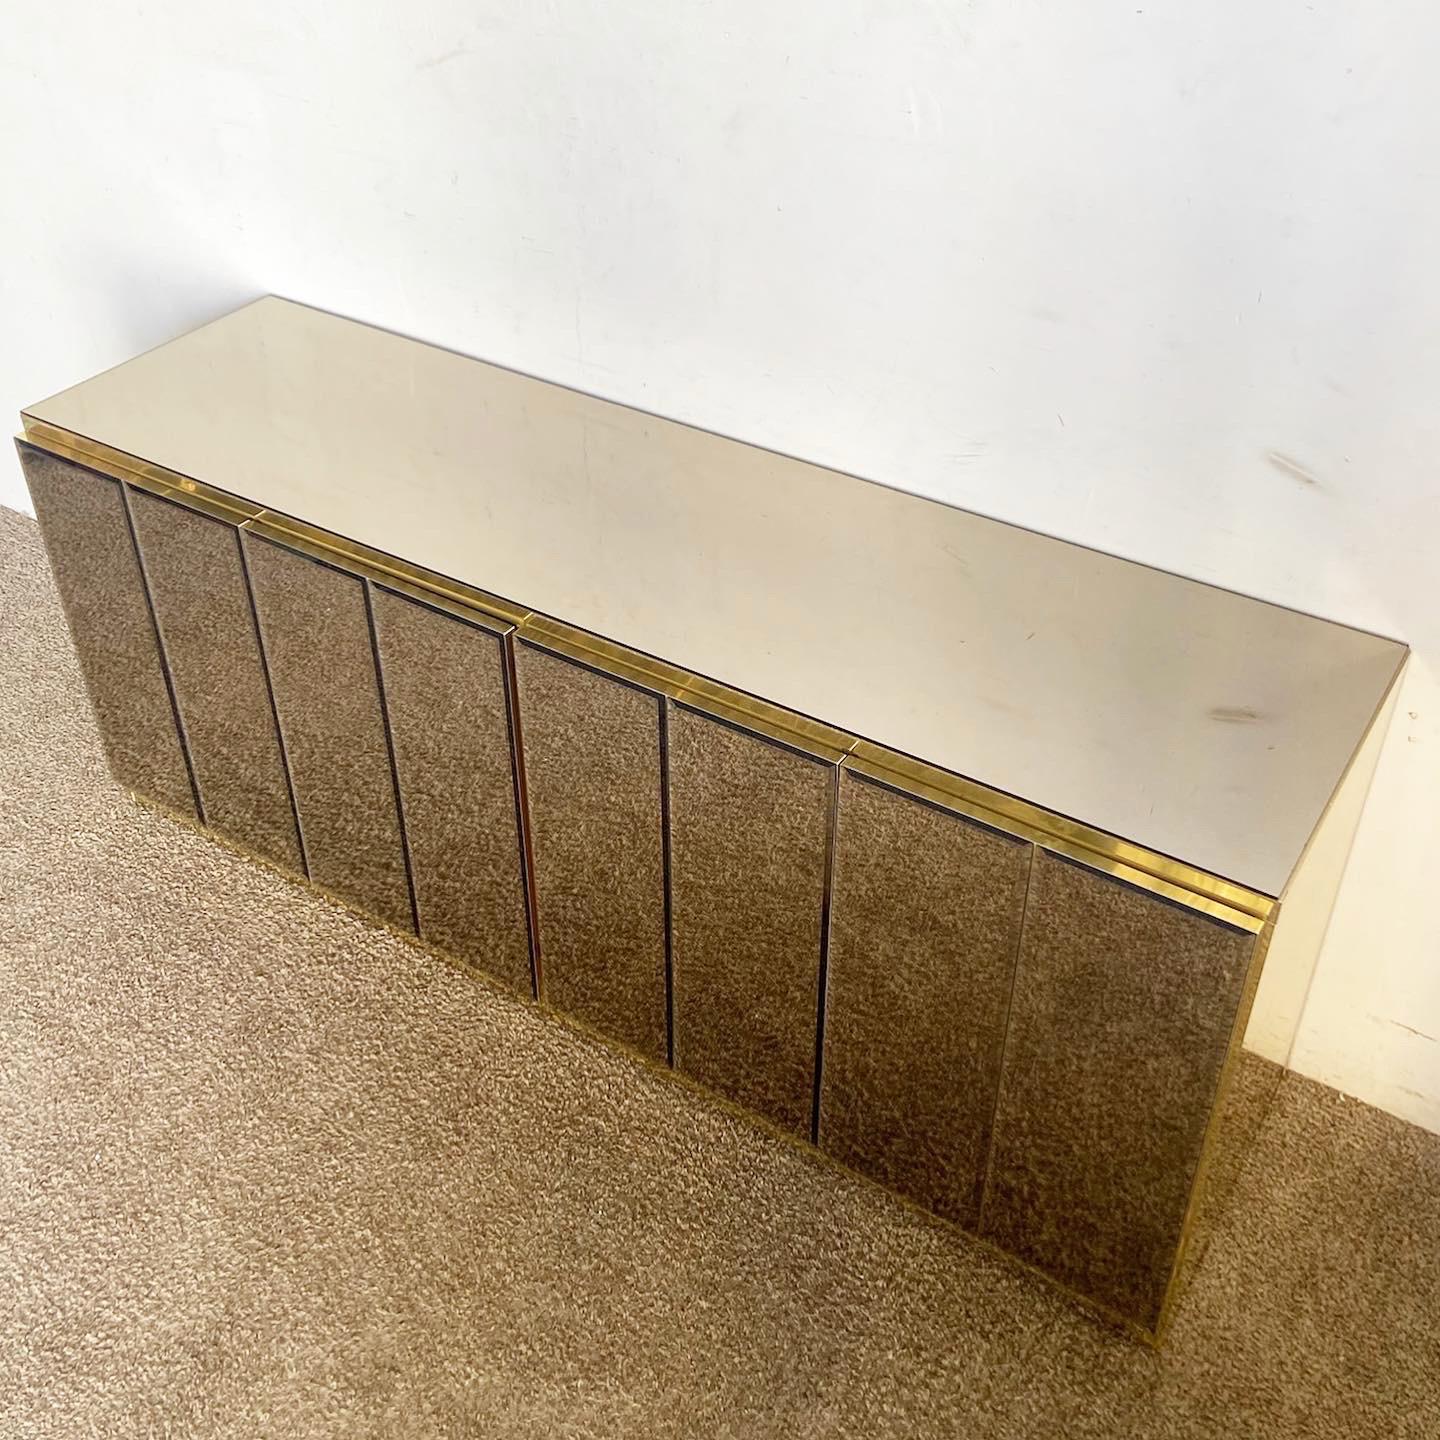 Elevate your decor with the Postmodern Gold Mirror Credenza. This luxurious credenza combines smoked beveled mirror panels with gold accents, blending functionality with a touch of opulence.
One chip on the bottom corner of the mirror door as seen